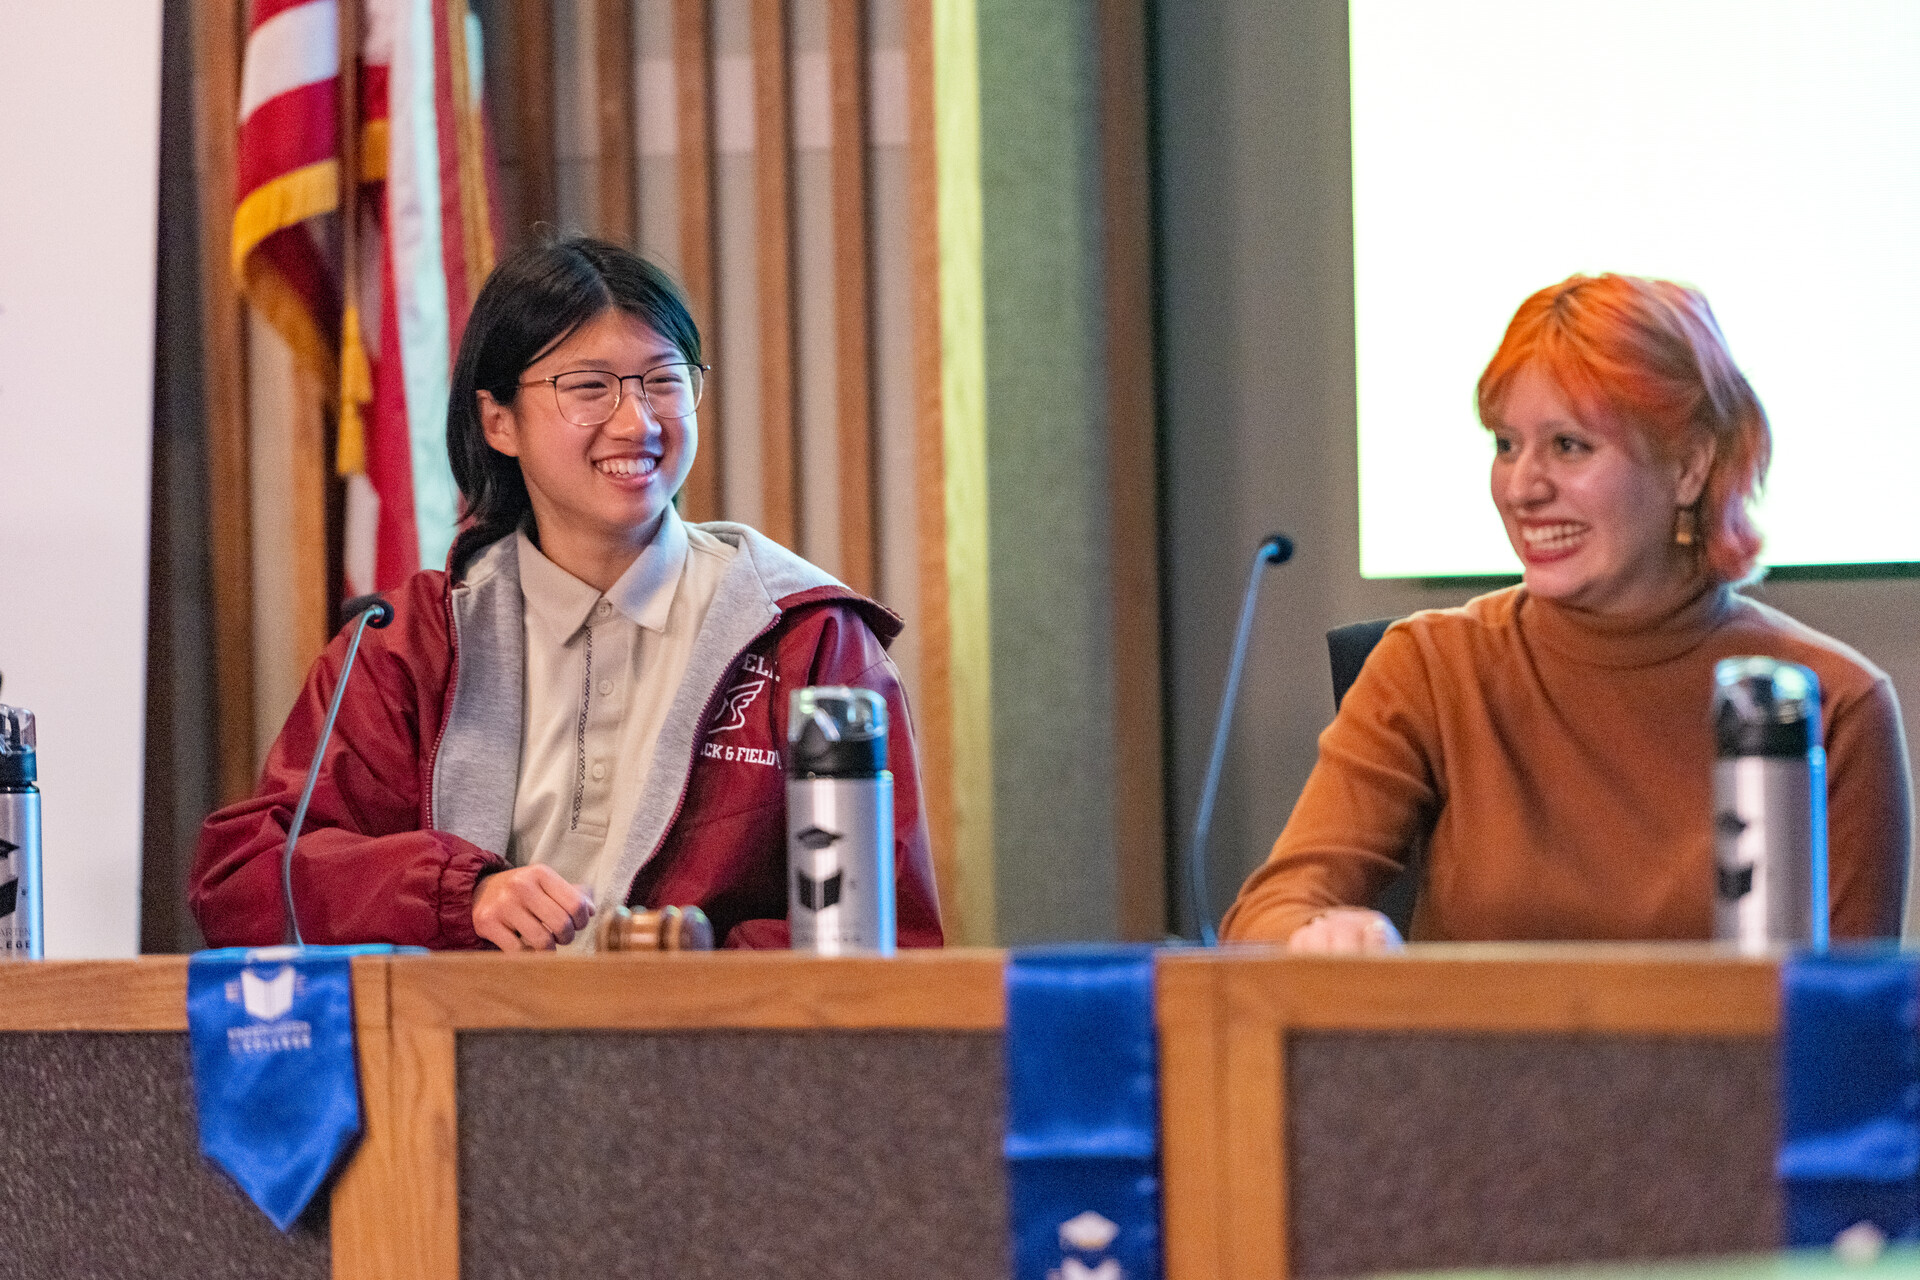 An Asian youth and a white youth smile with dyed orange hair sit behind a podium and smile at an unseen audience.